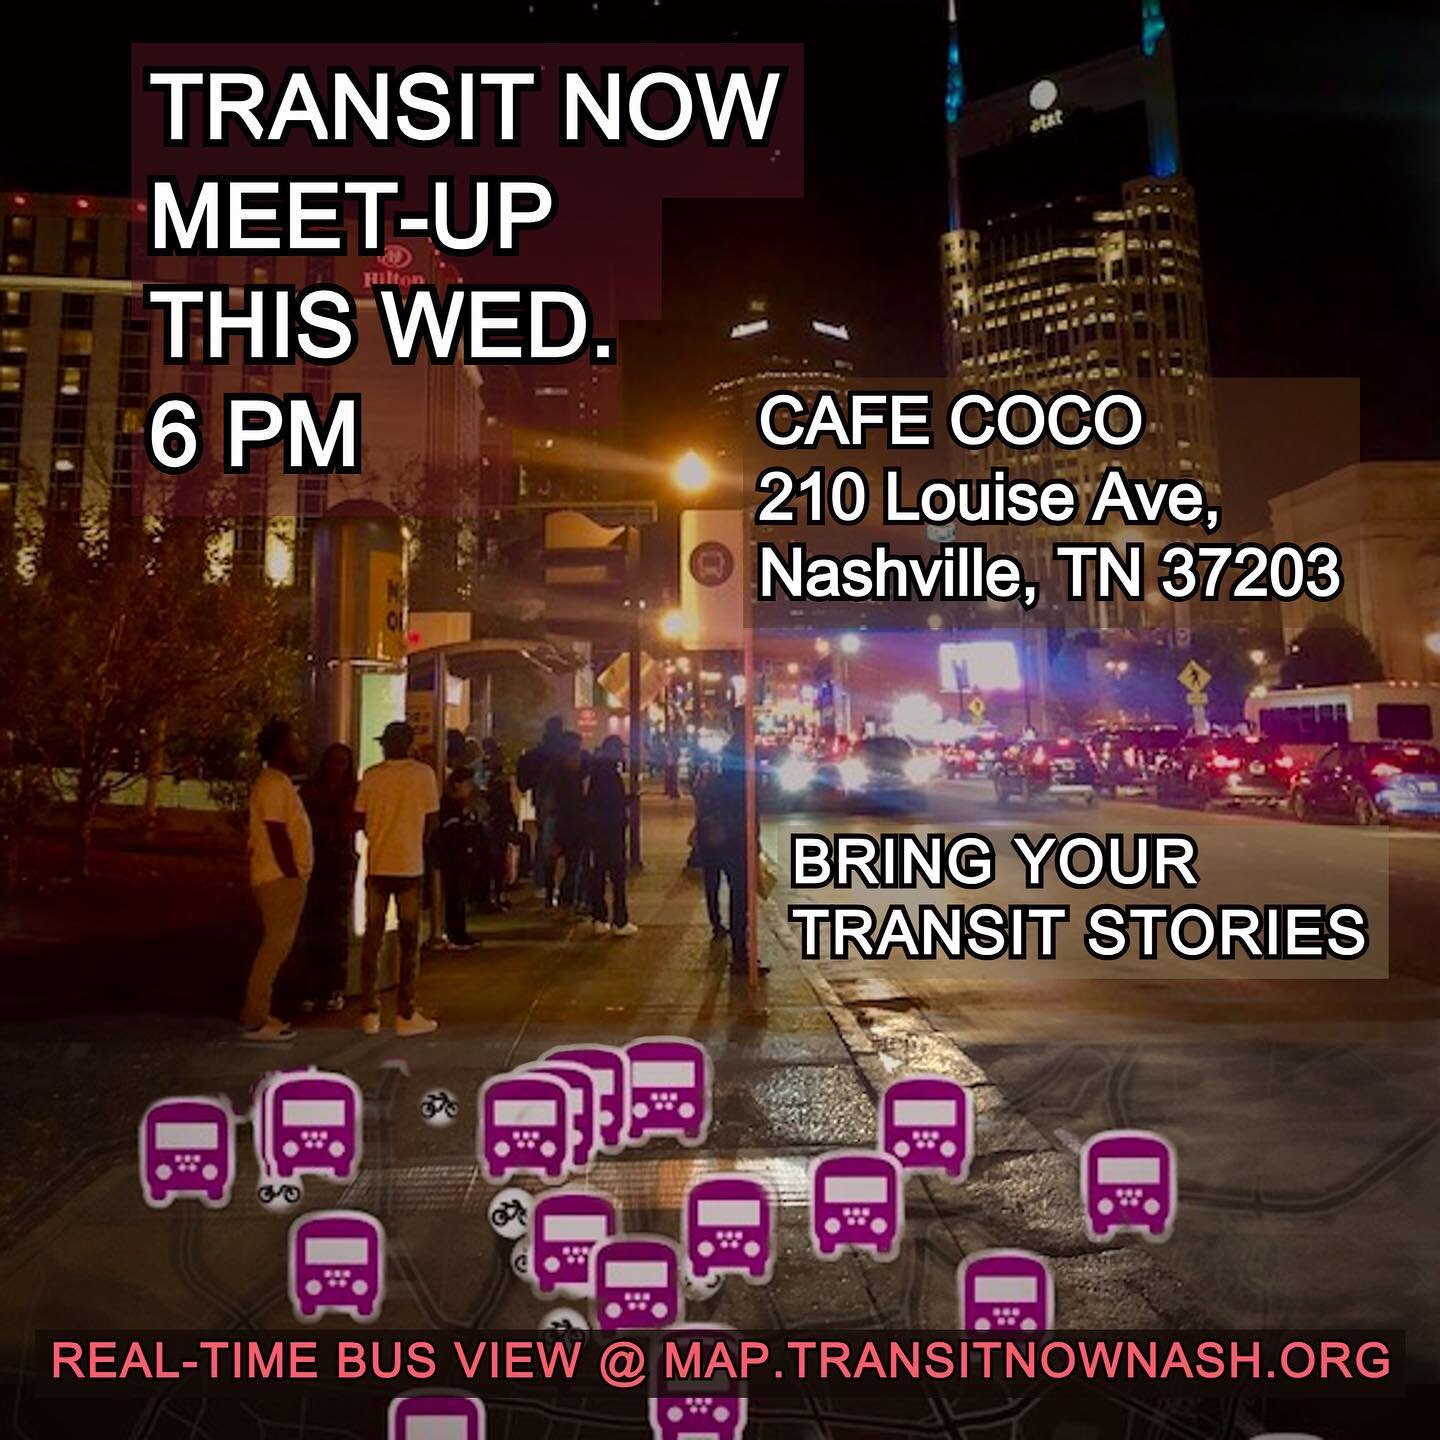 Tomorrow - Transit Now is having a meet-up Wednesday, November 8 at 6pm. We'll be talking about our ideas for the near-term and not too distant future, with Nashville's transit &amp; livability challenges.

Transit Now's Real-Time Bus Map is back onl